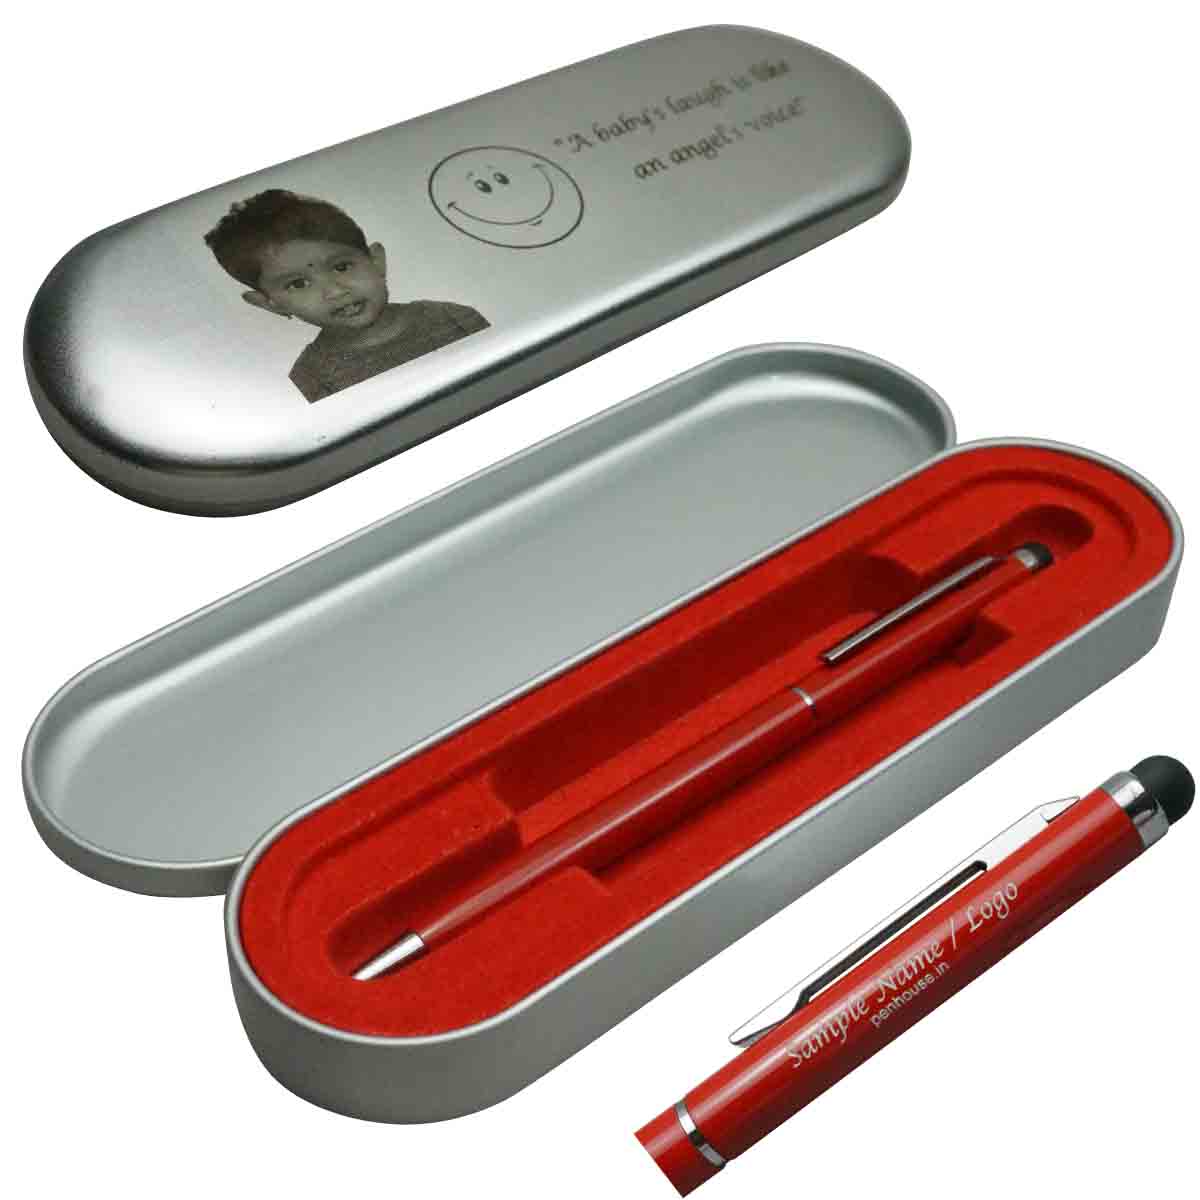 penhouse_M02RS - Red Body and Trim Twist Ball pen with Stylus with customization Model 18601